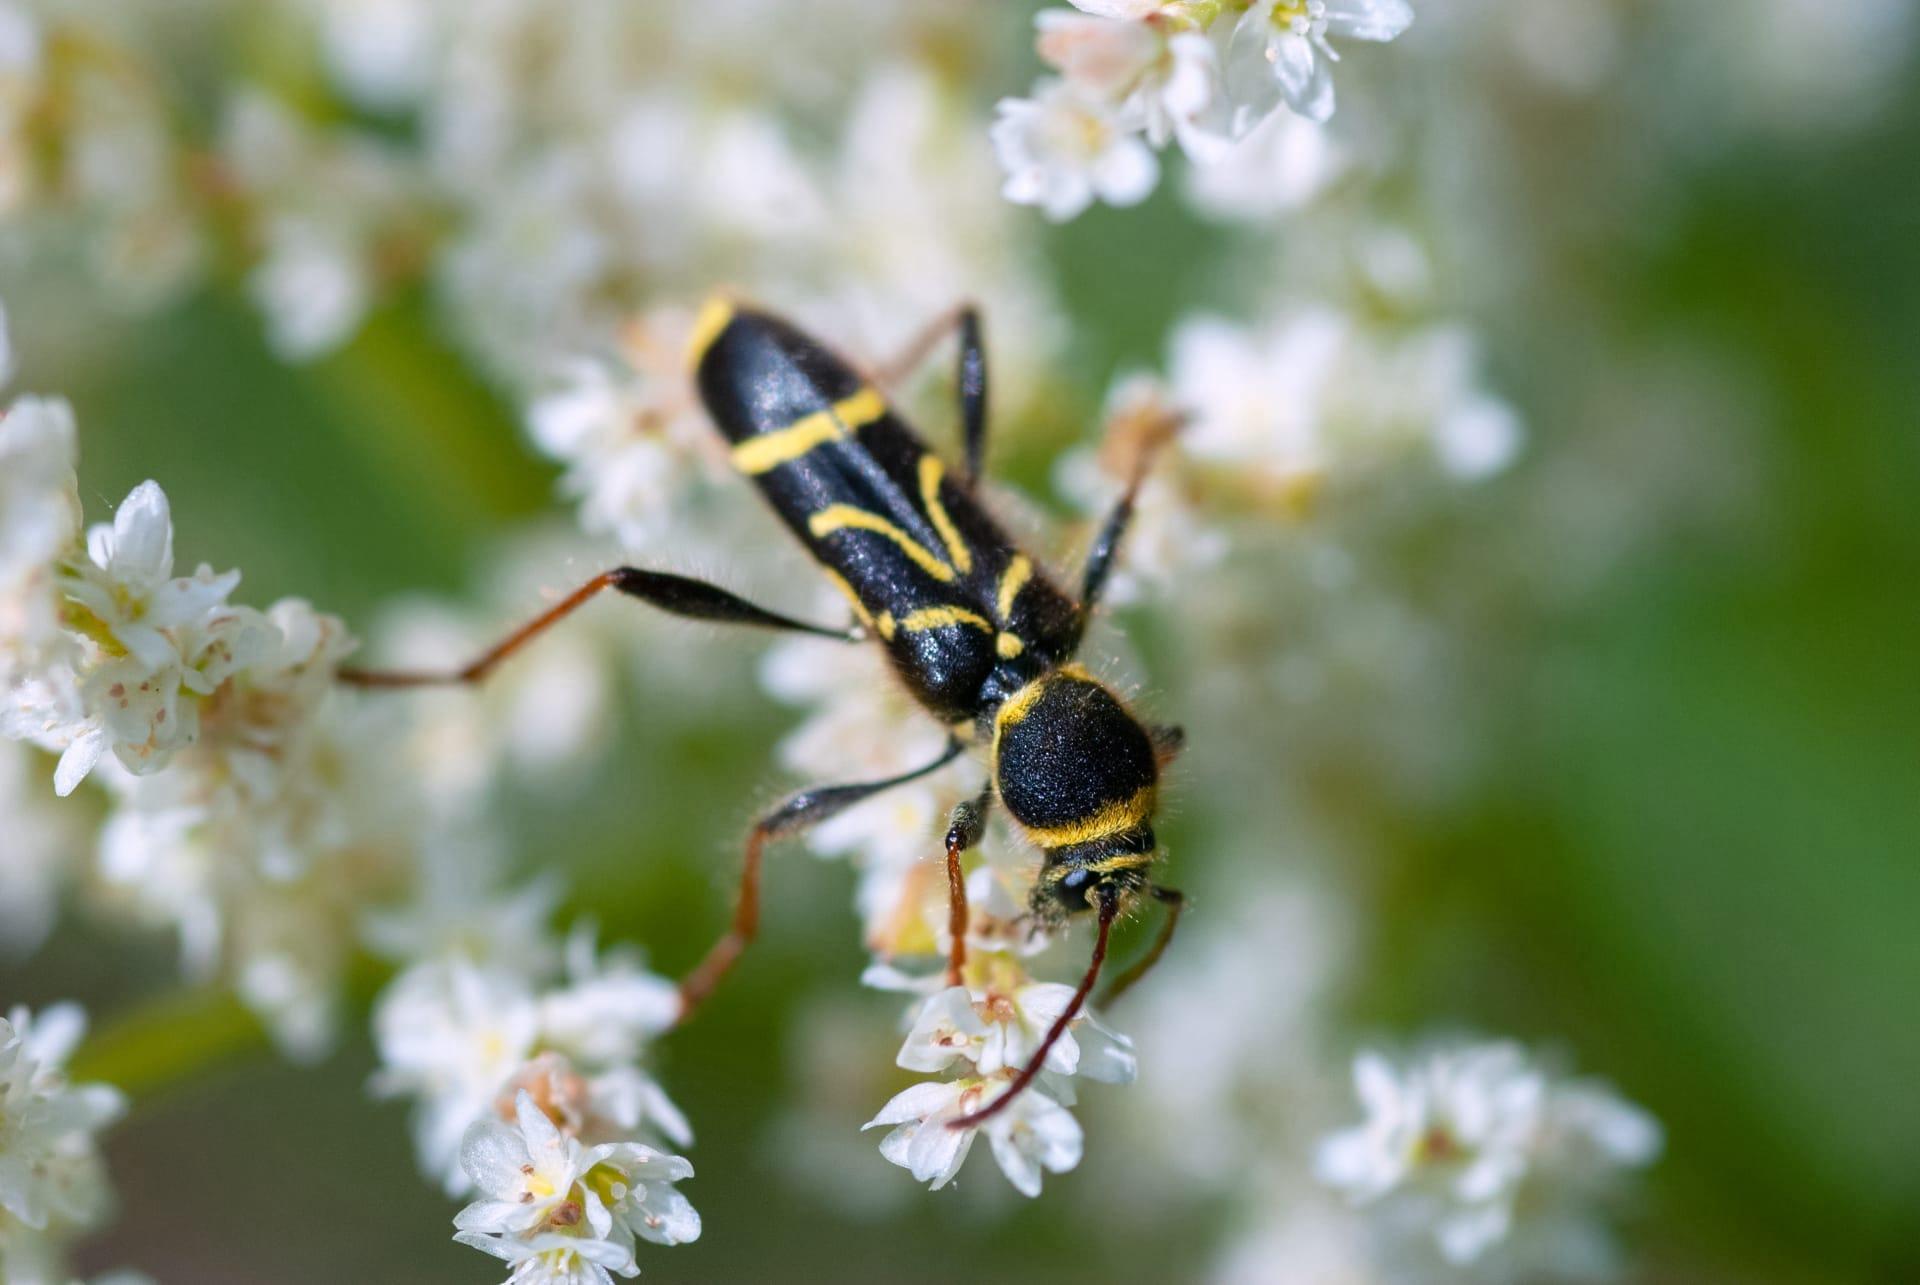 Parasitic wasp pictures